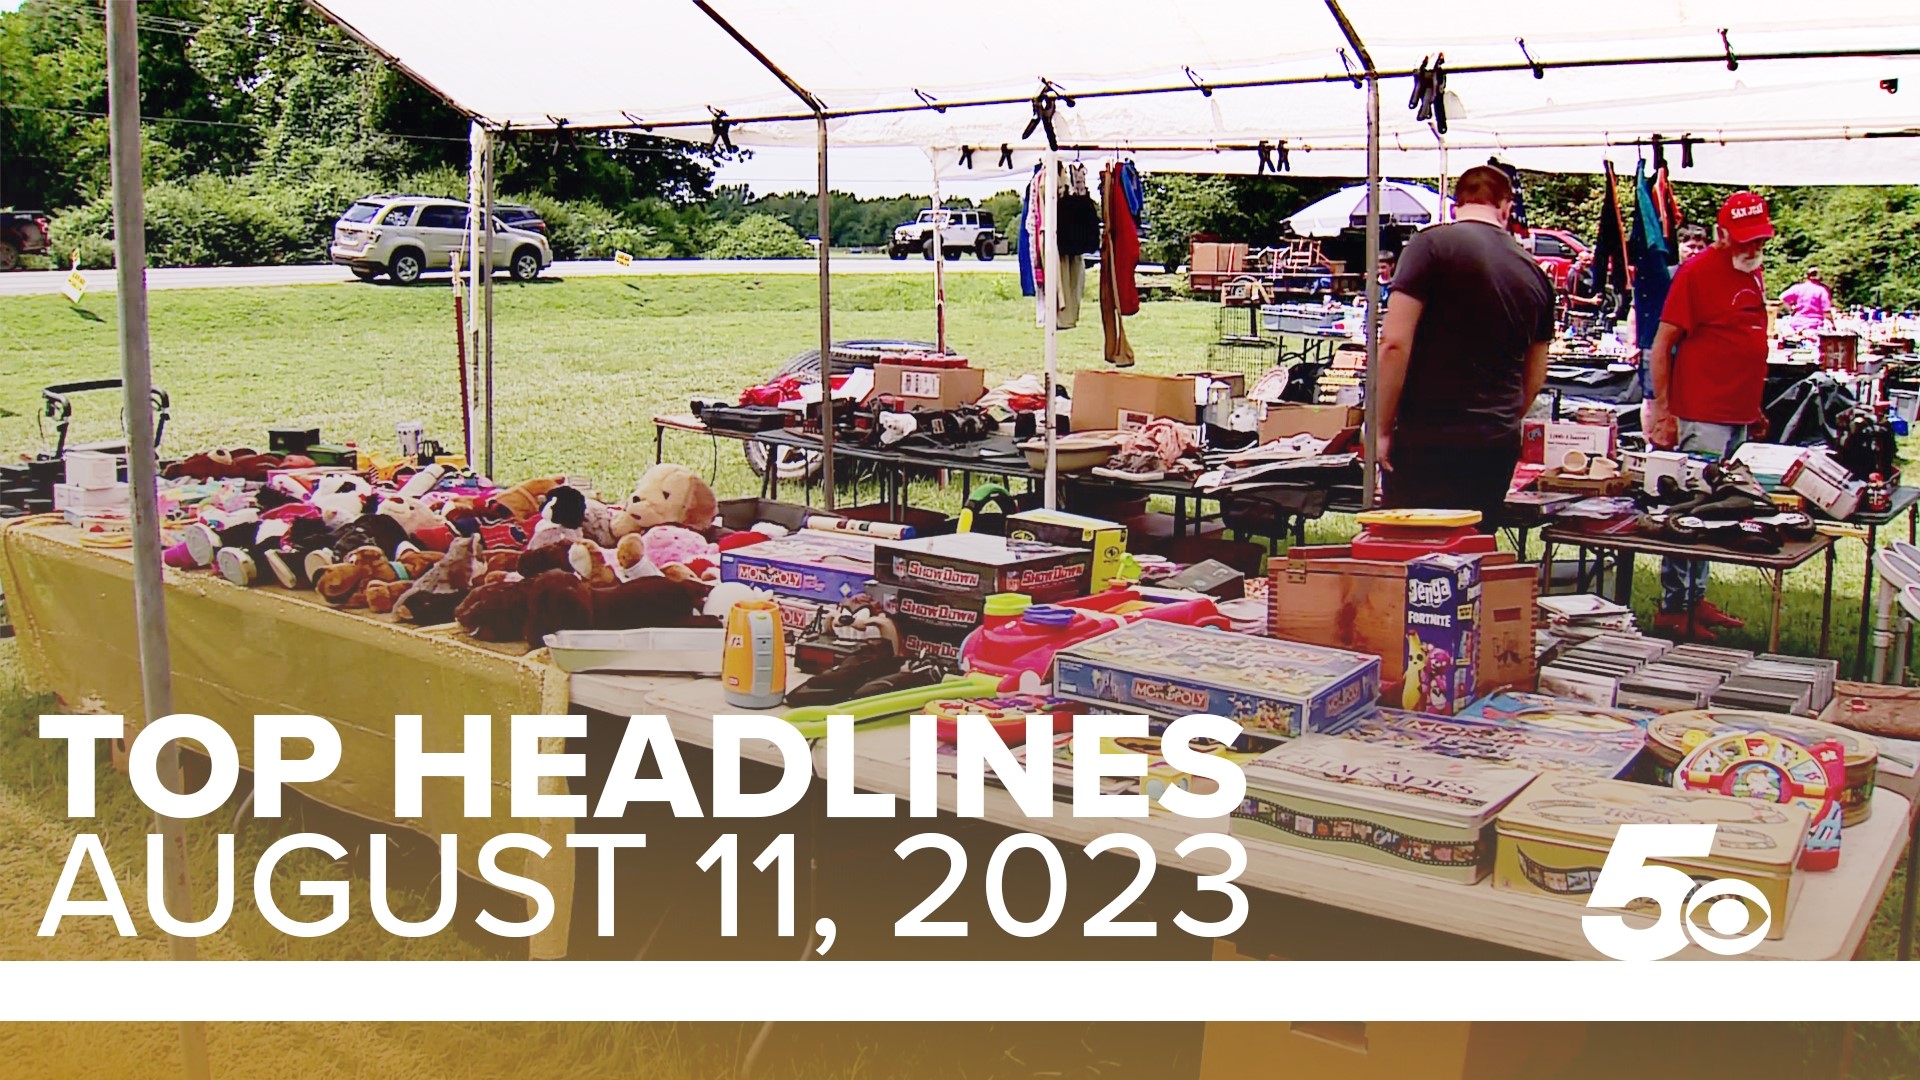 Top headlines for Northwest Arkansas and the River Valley for August 11, 2023.